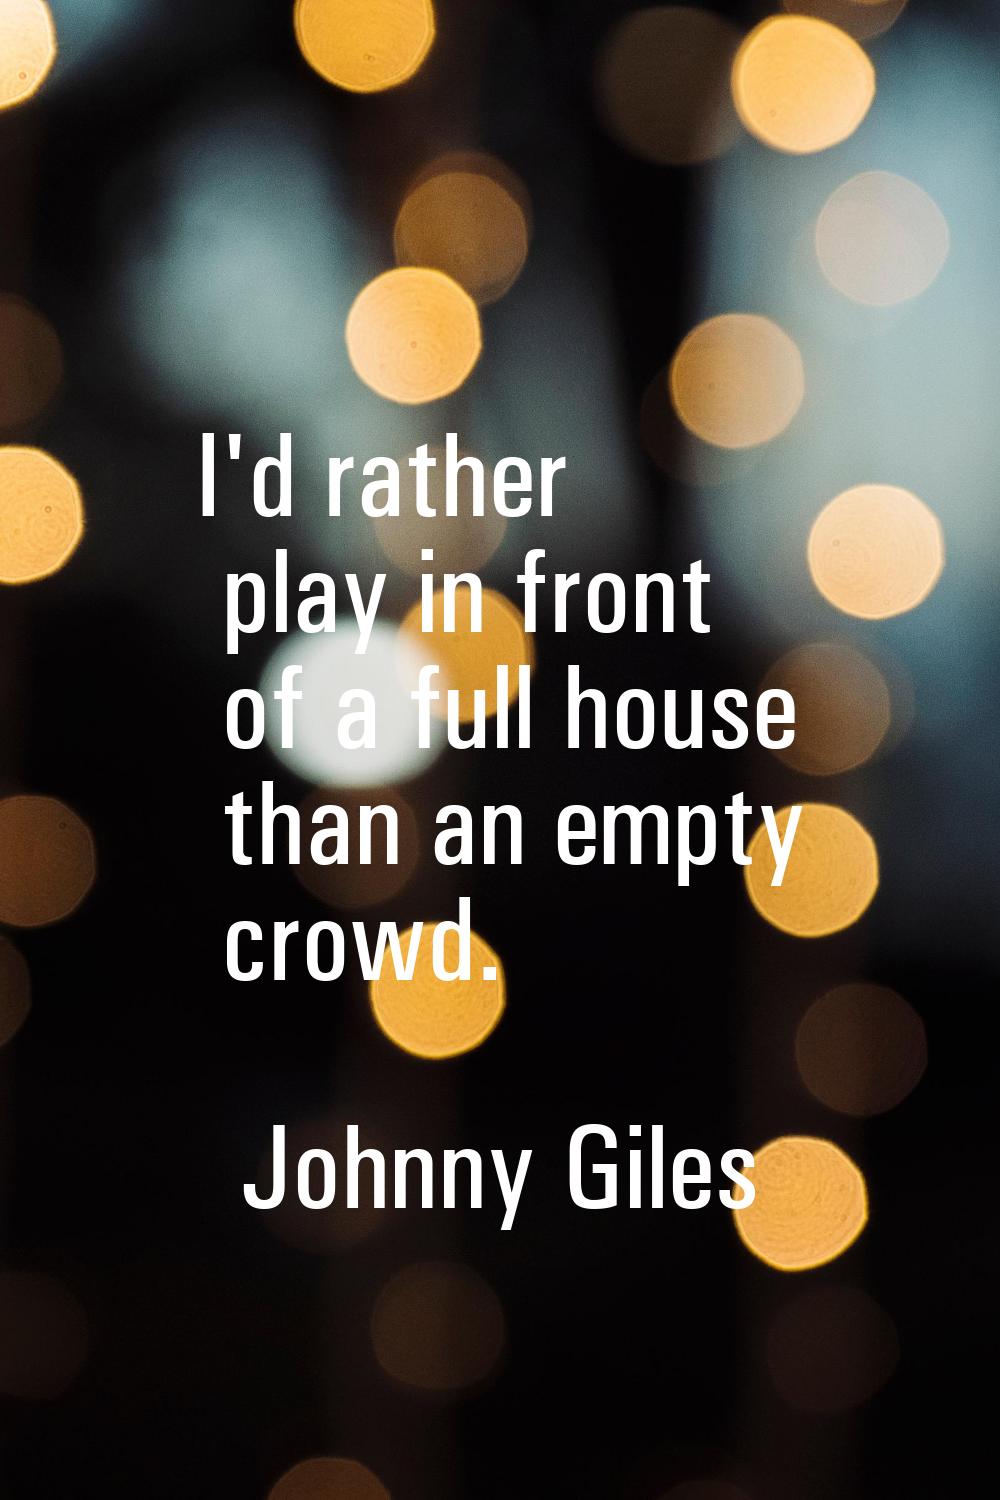 I'd rather play in front of a full house than an empty crowd.